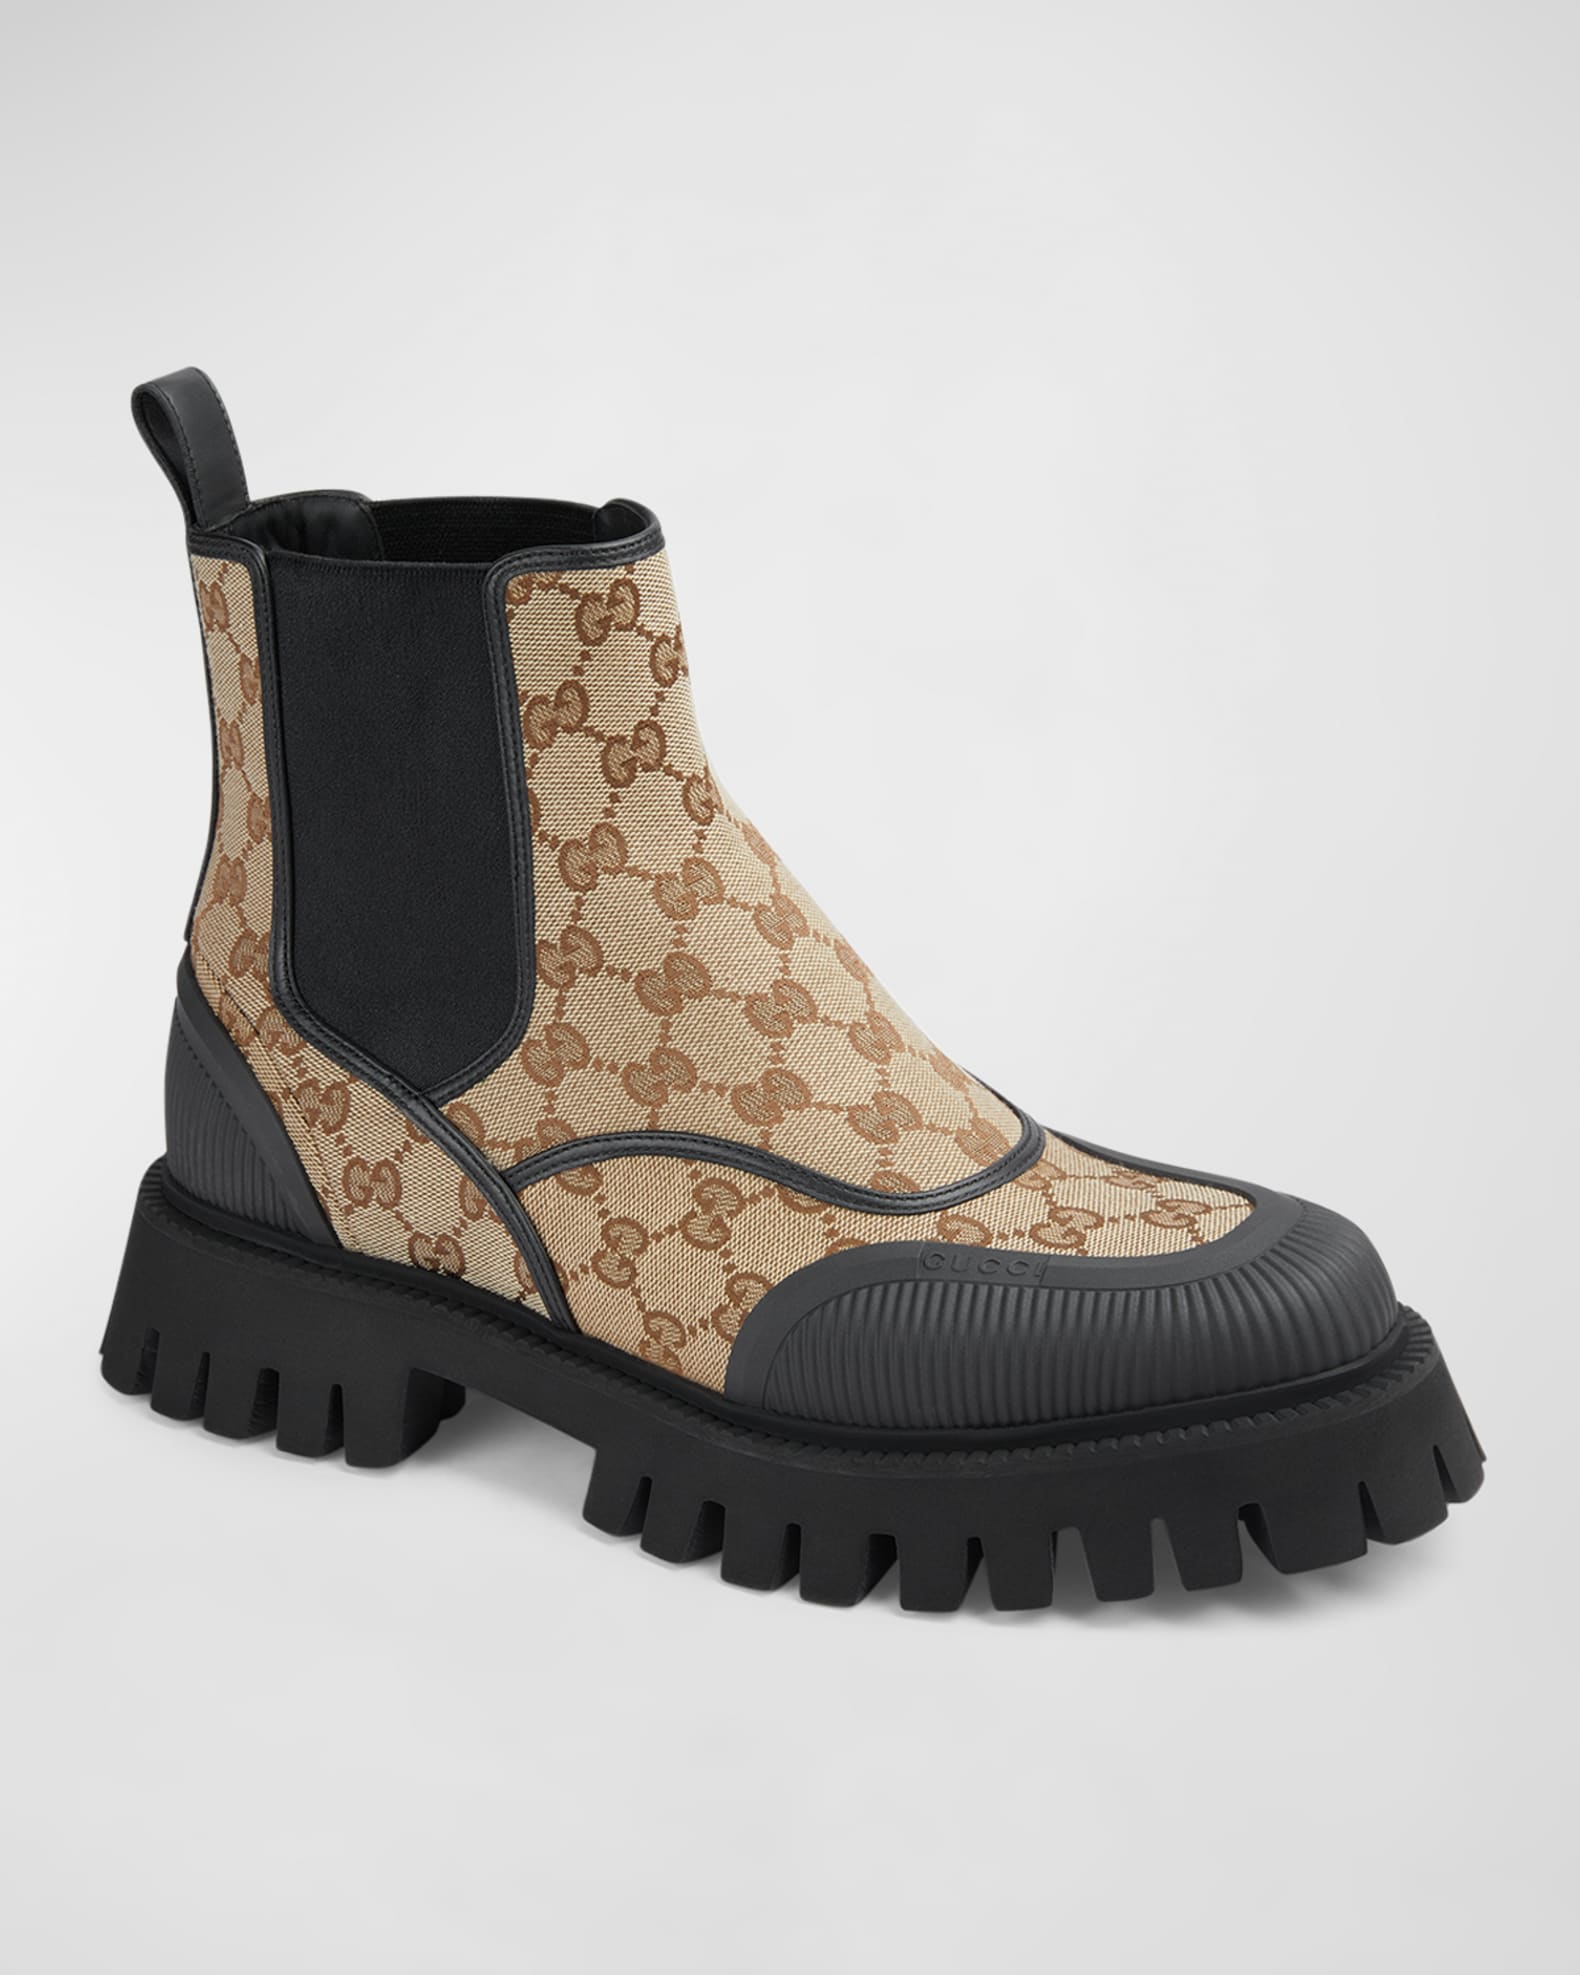 Gucci Men's GG Leather Boot